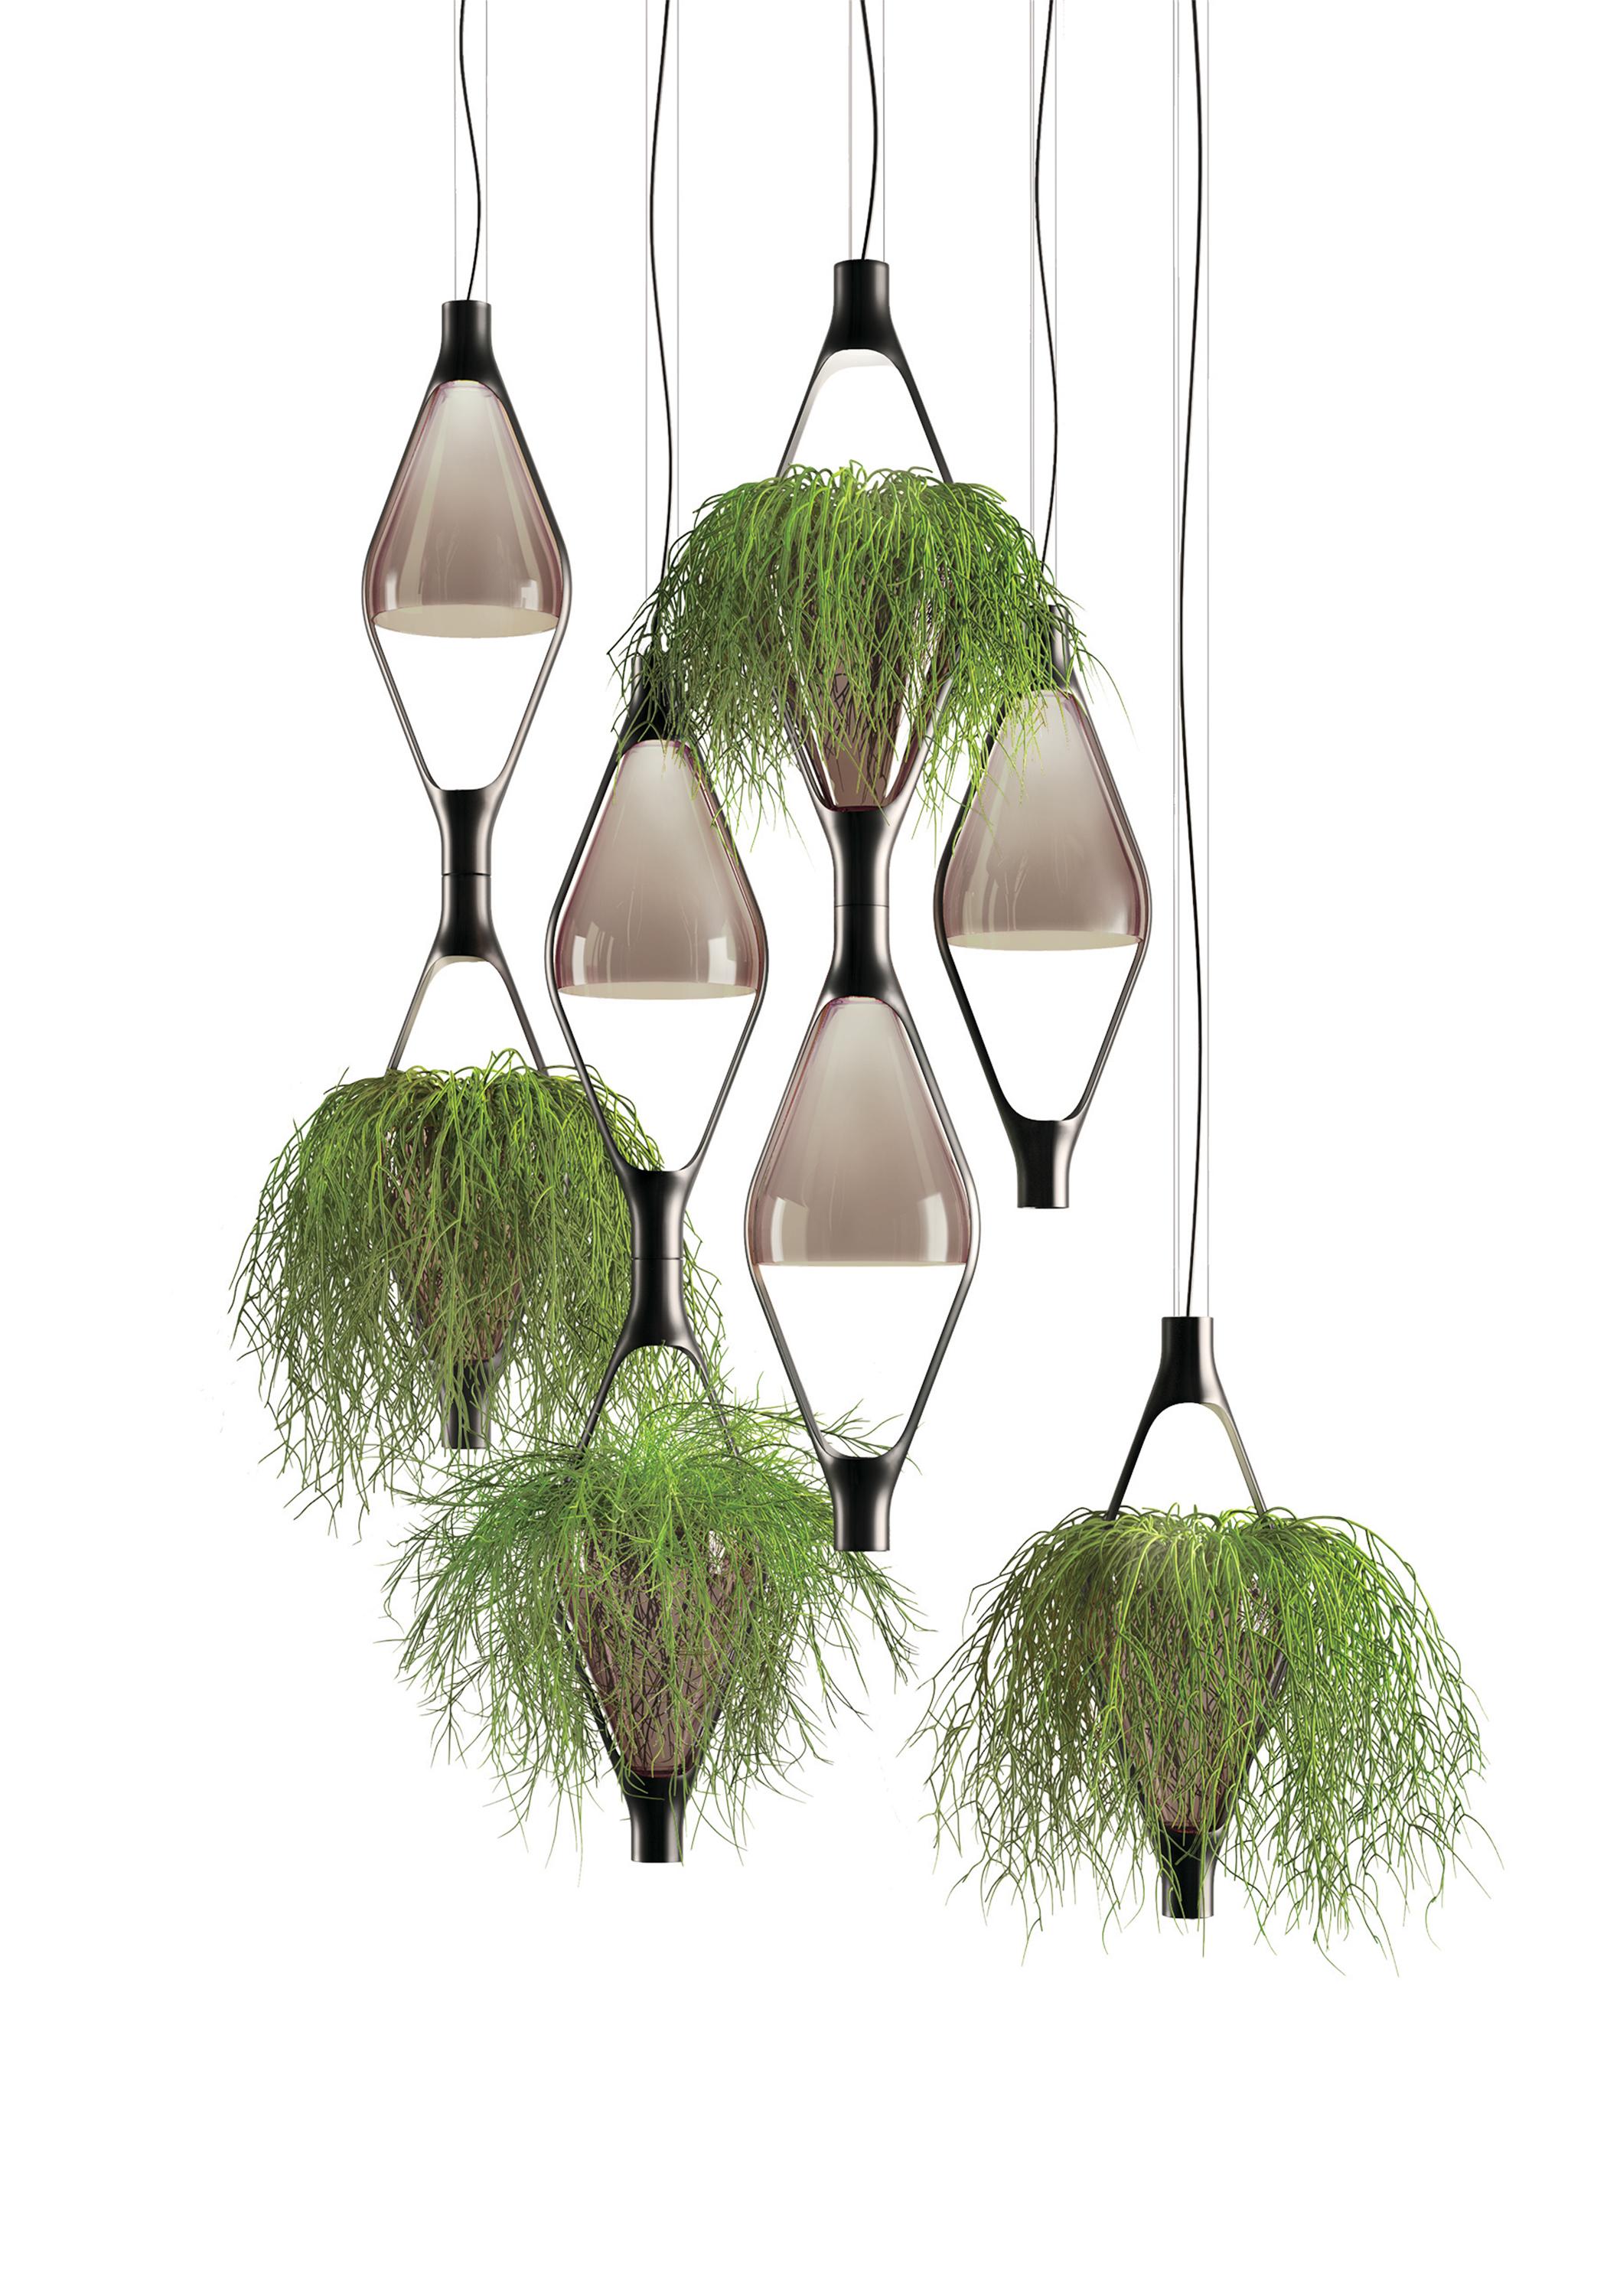 'Viceversa' Modular Suspension lamp by Noé Lawrance for KDLN in smoke grey.

Executed in smoke colored blown glass with a matte gray metallic structure. This unique suspension lamp doubles seamlessly as a hanging planter through the use of its